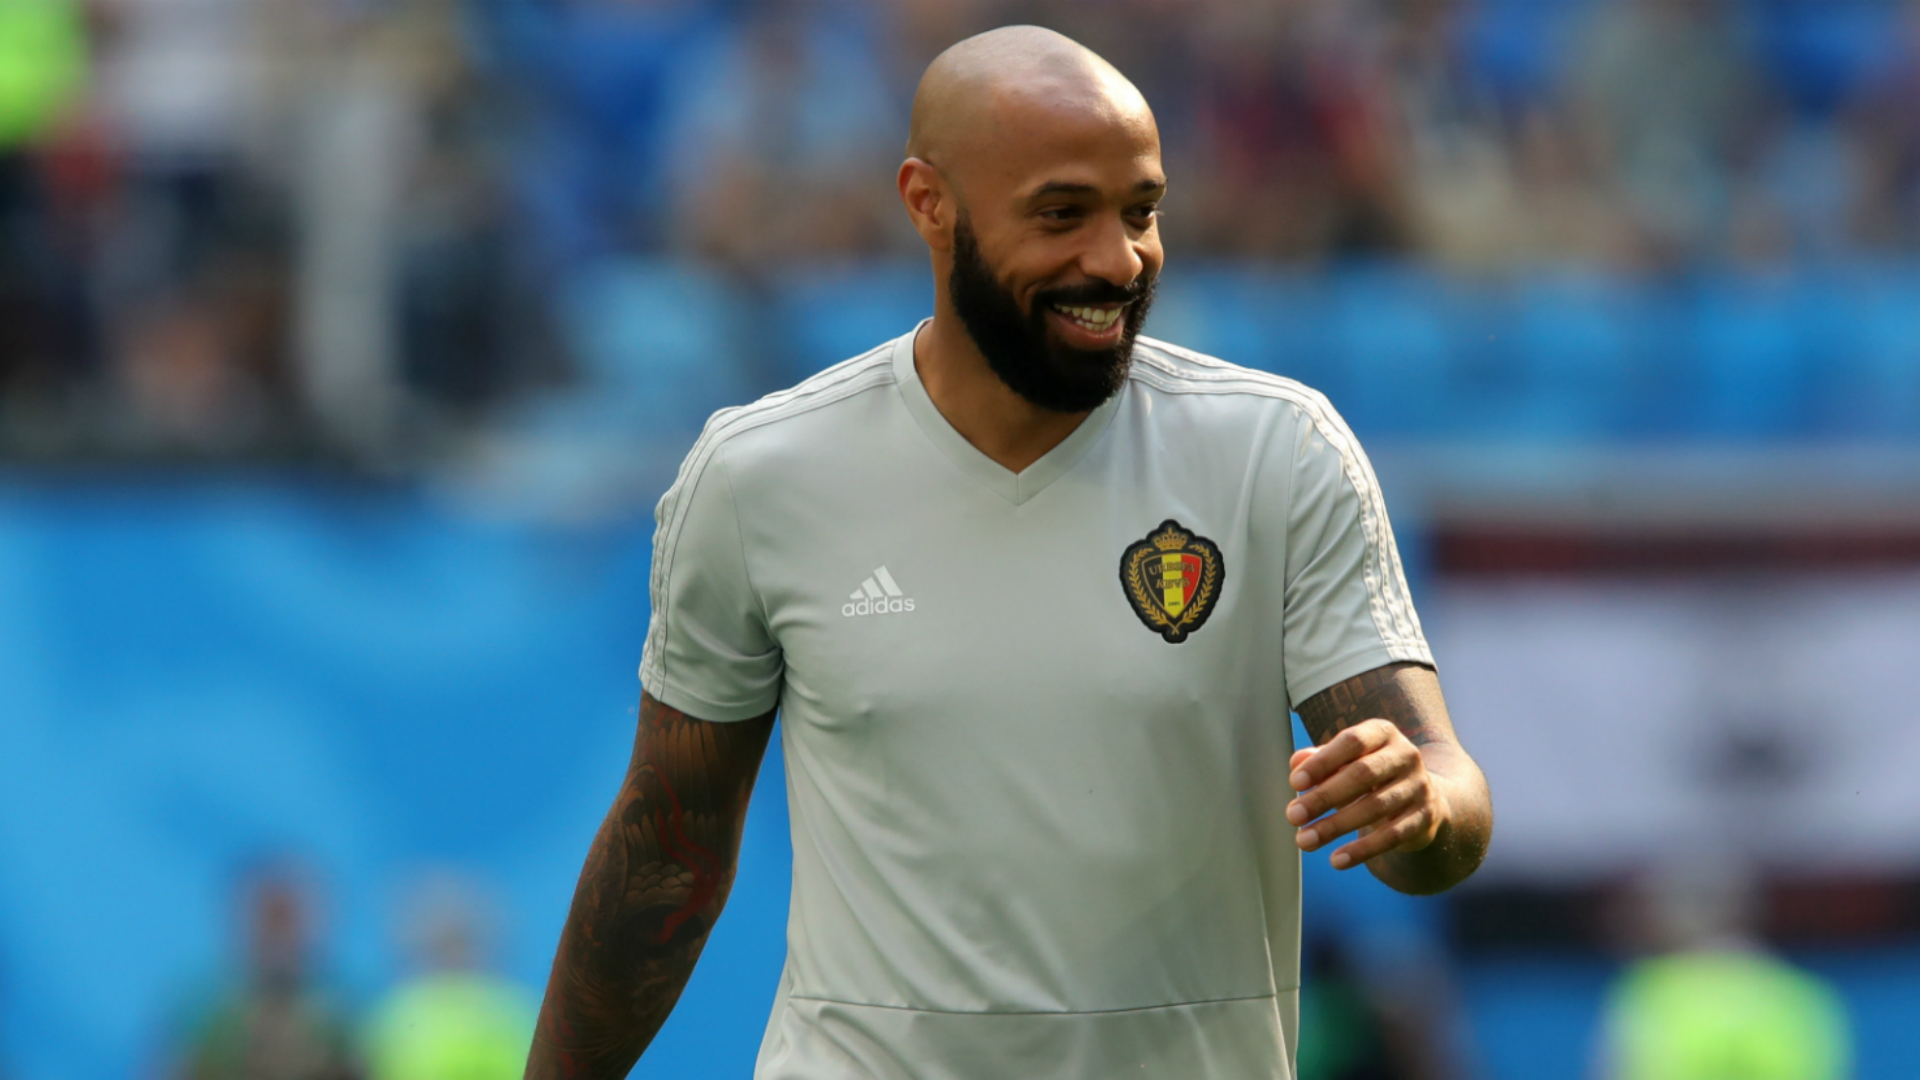 Monaco are in the relegation places in Ligue 1, but new head coach Thierry Henry has said he will "see what's possible" this season.